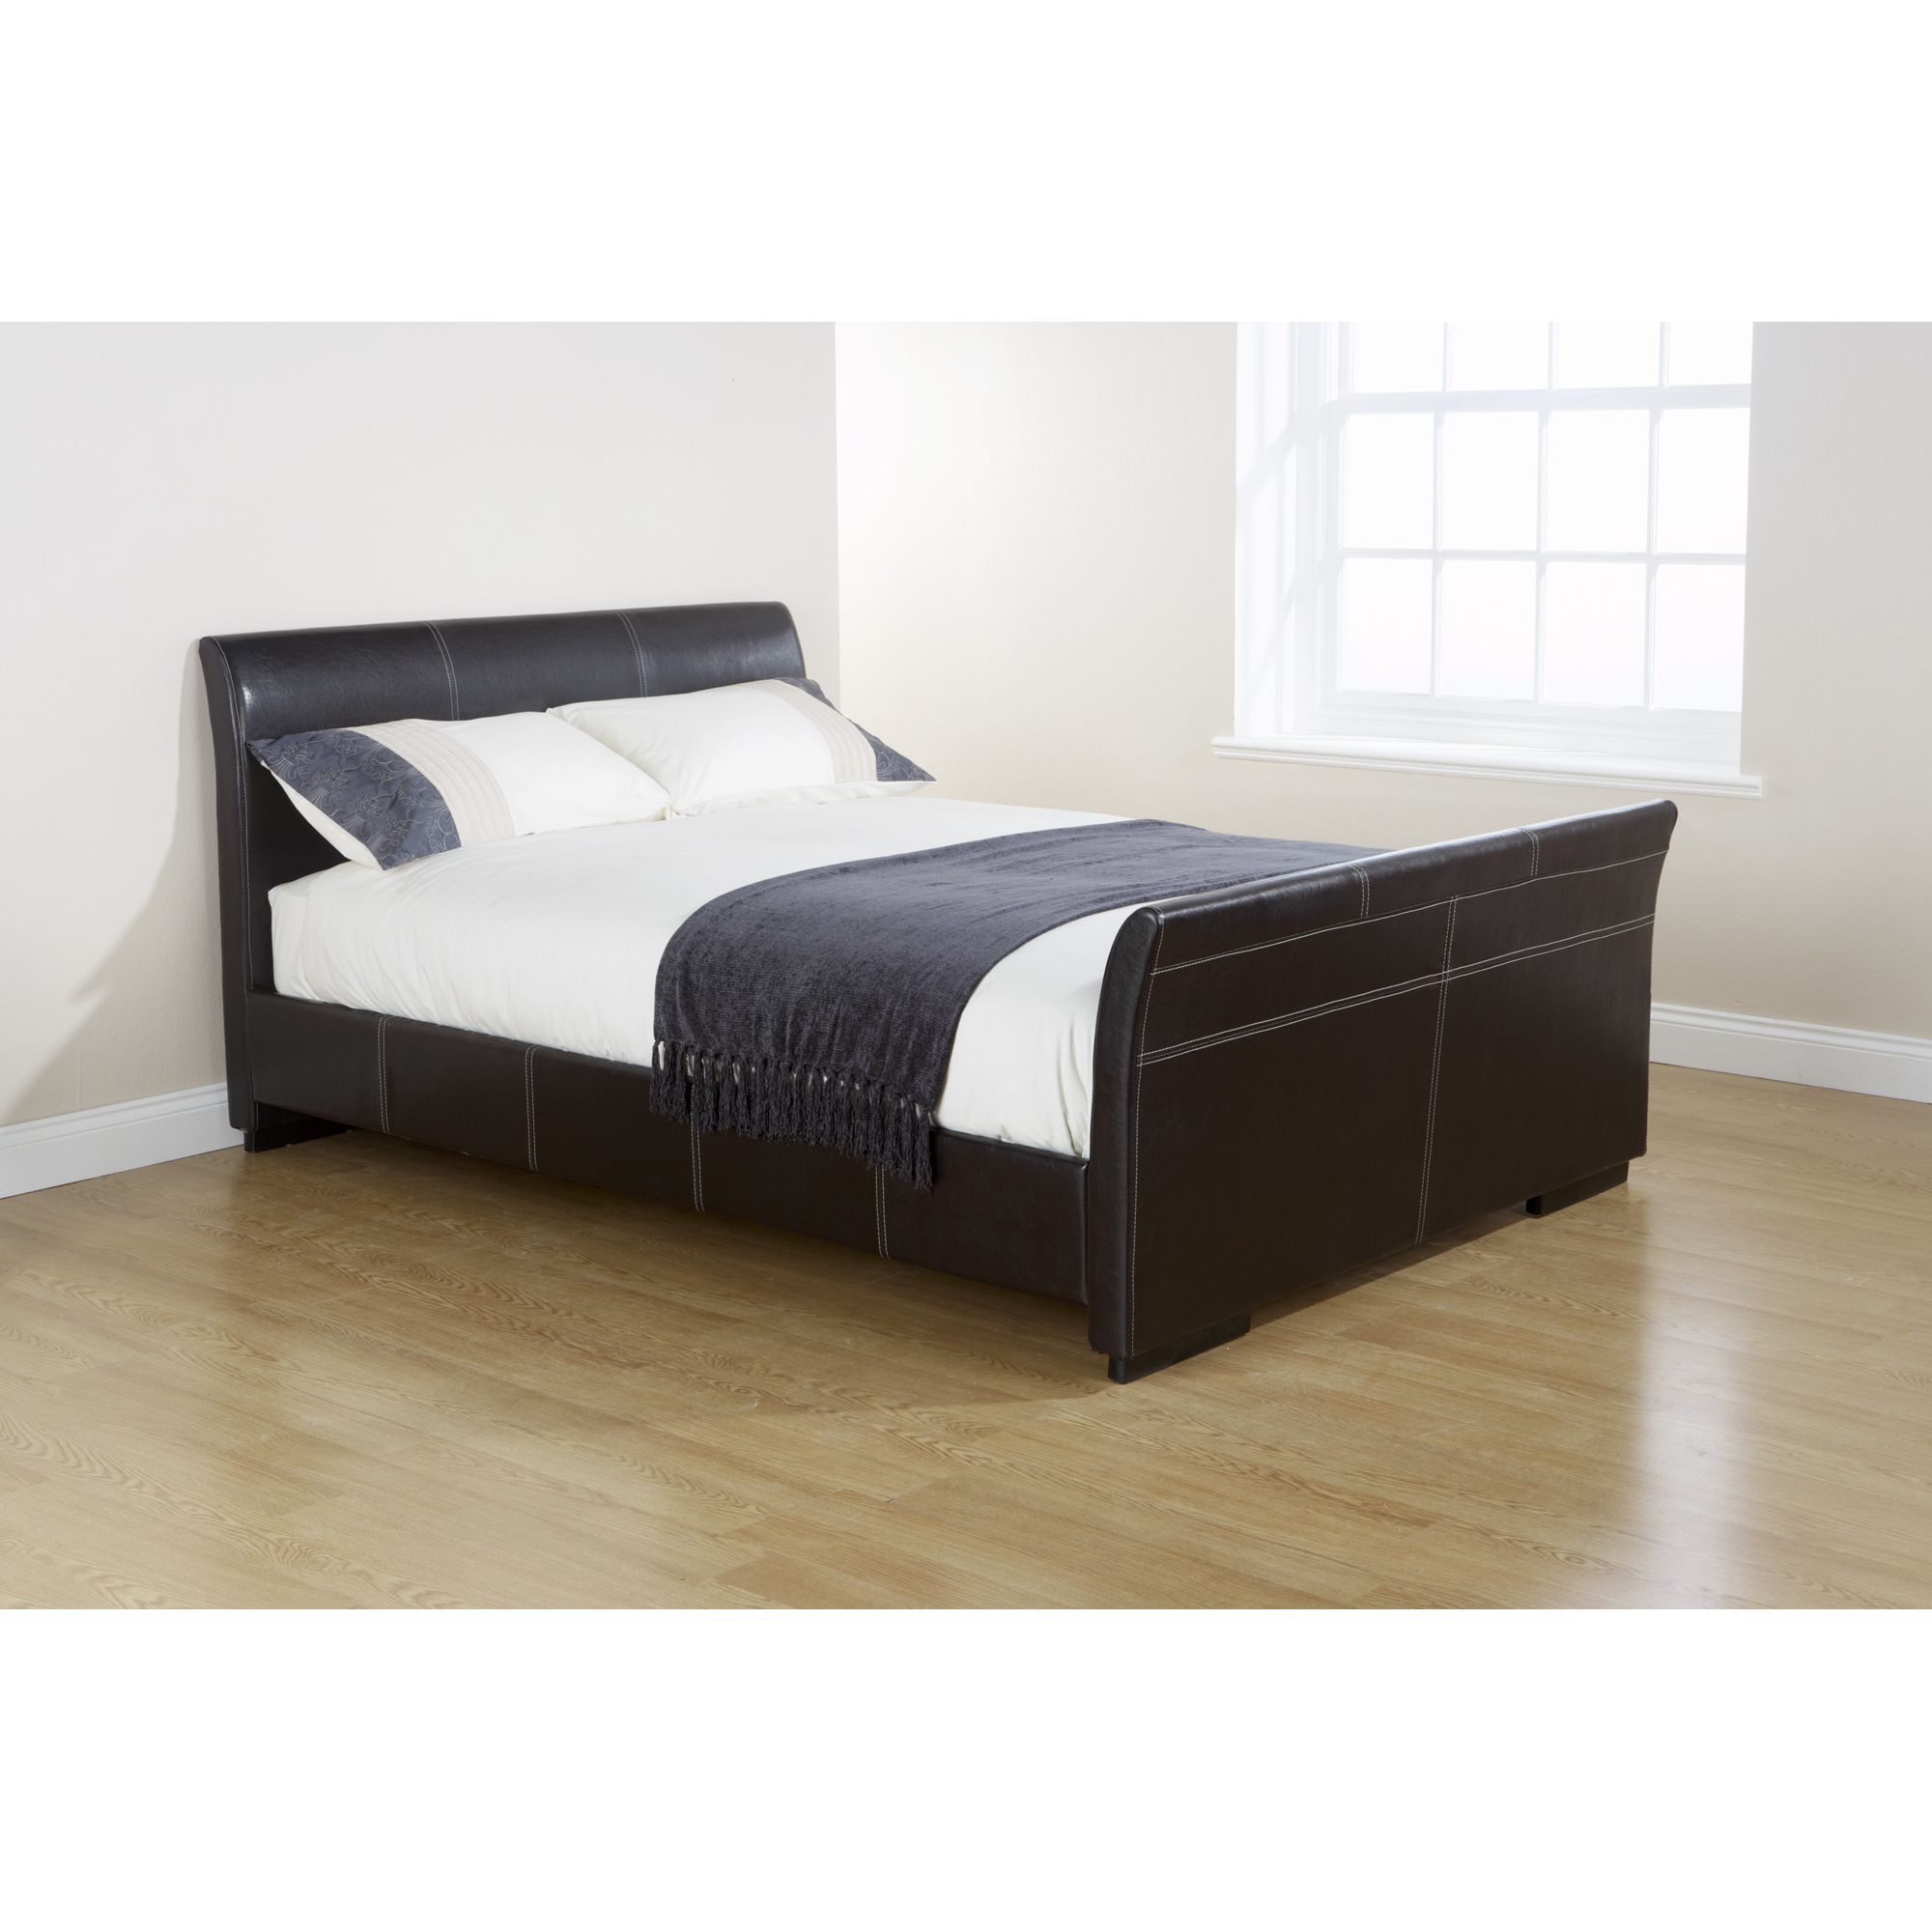 Elements York Sleigh Bed - King at Tesco Direct